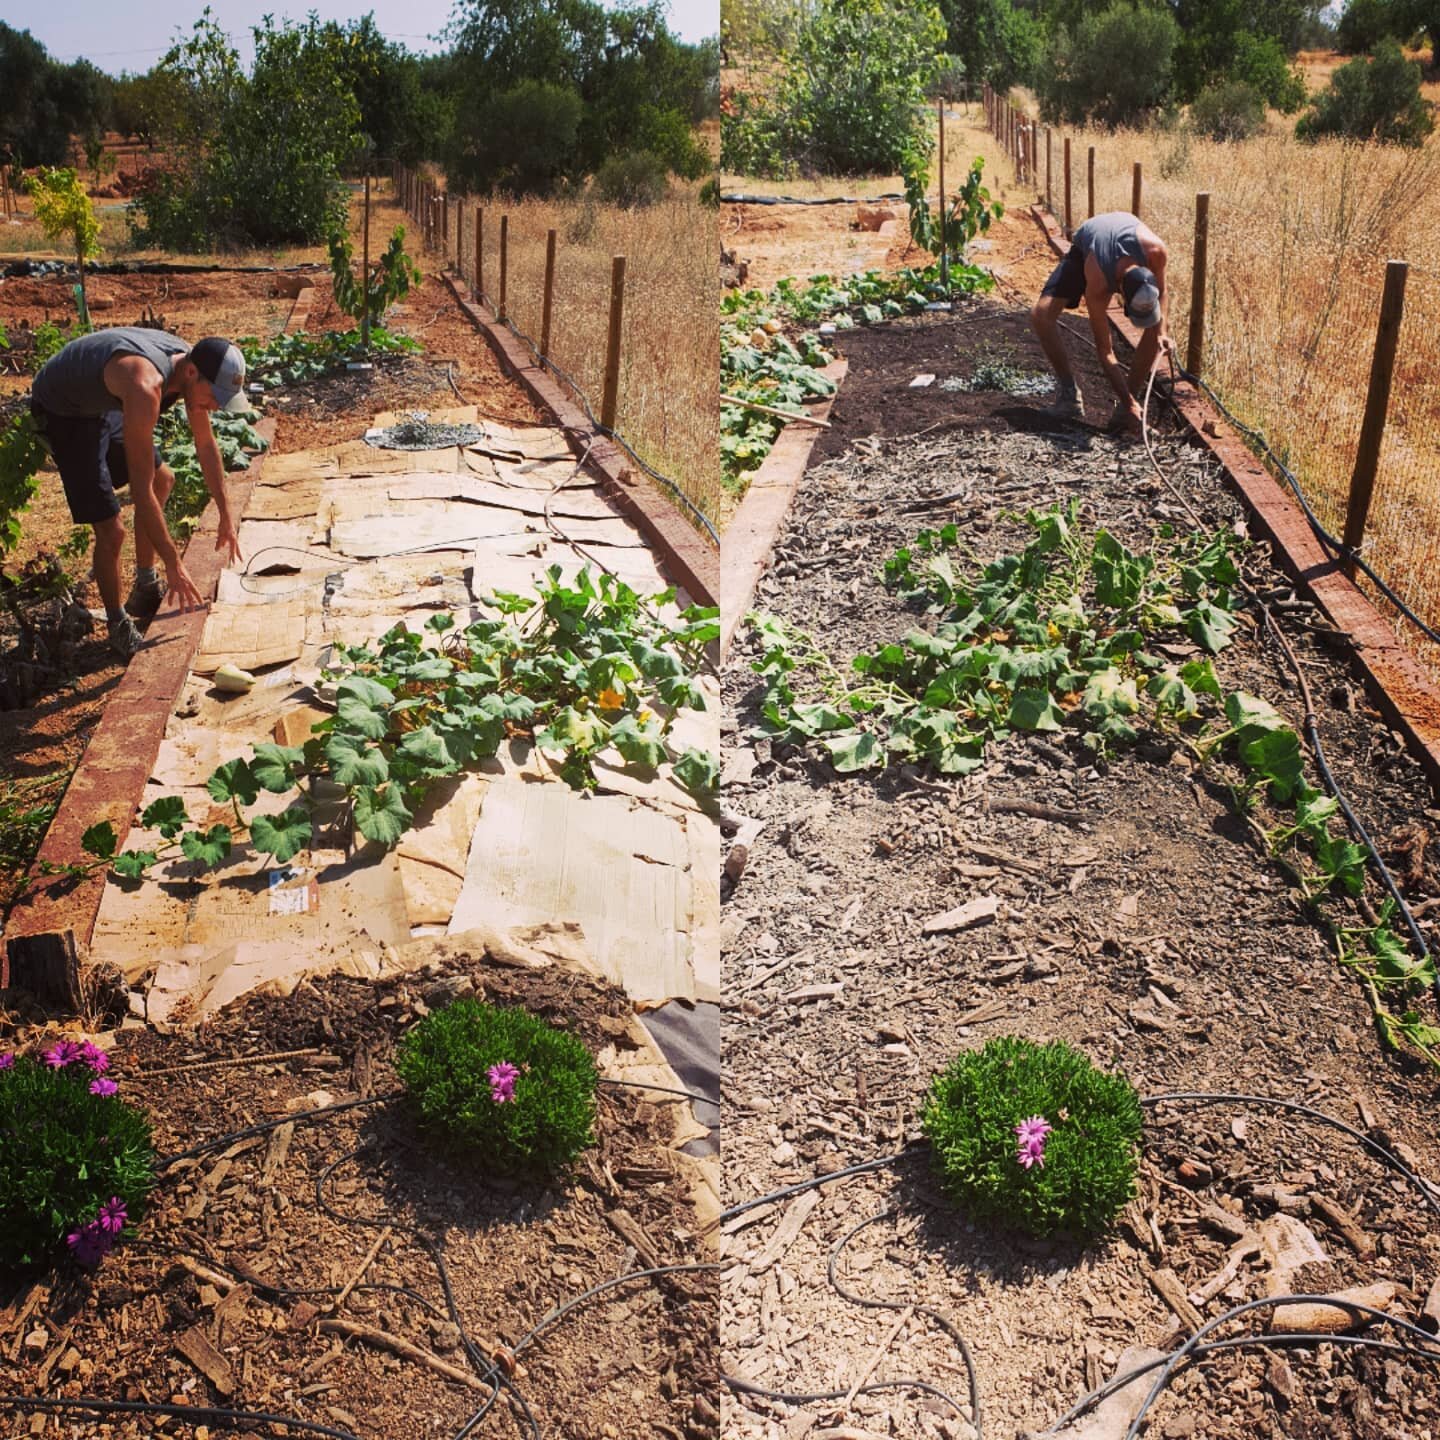 Mulching techniques: recycling cardboard and a layer of plain compost. #permaculturedesign #mulching #botanicalgarden #algarveportugal #tavira #sustainablelifestyle #wwoof